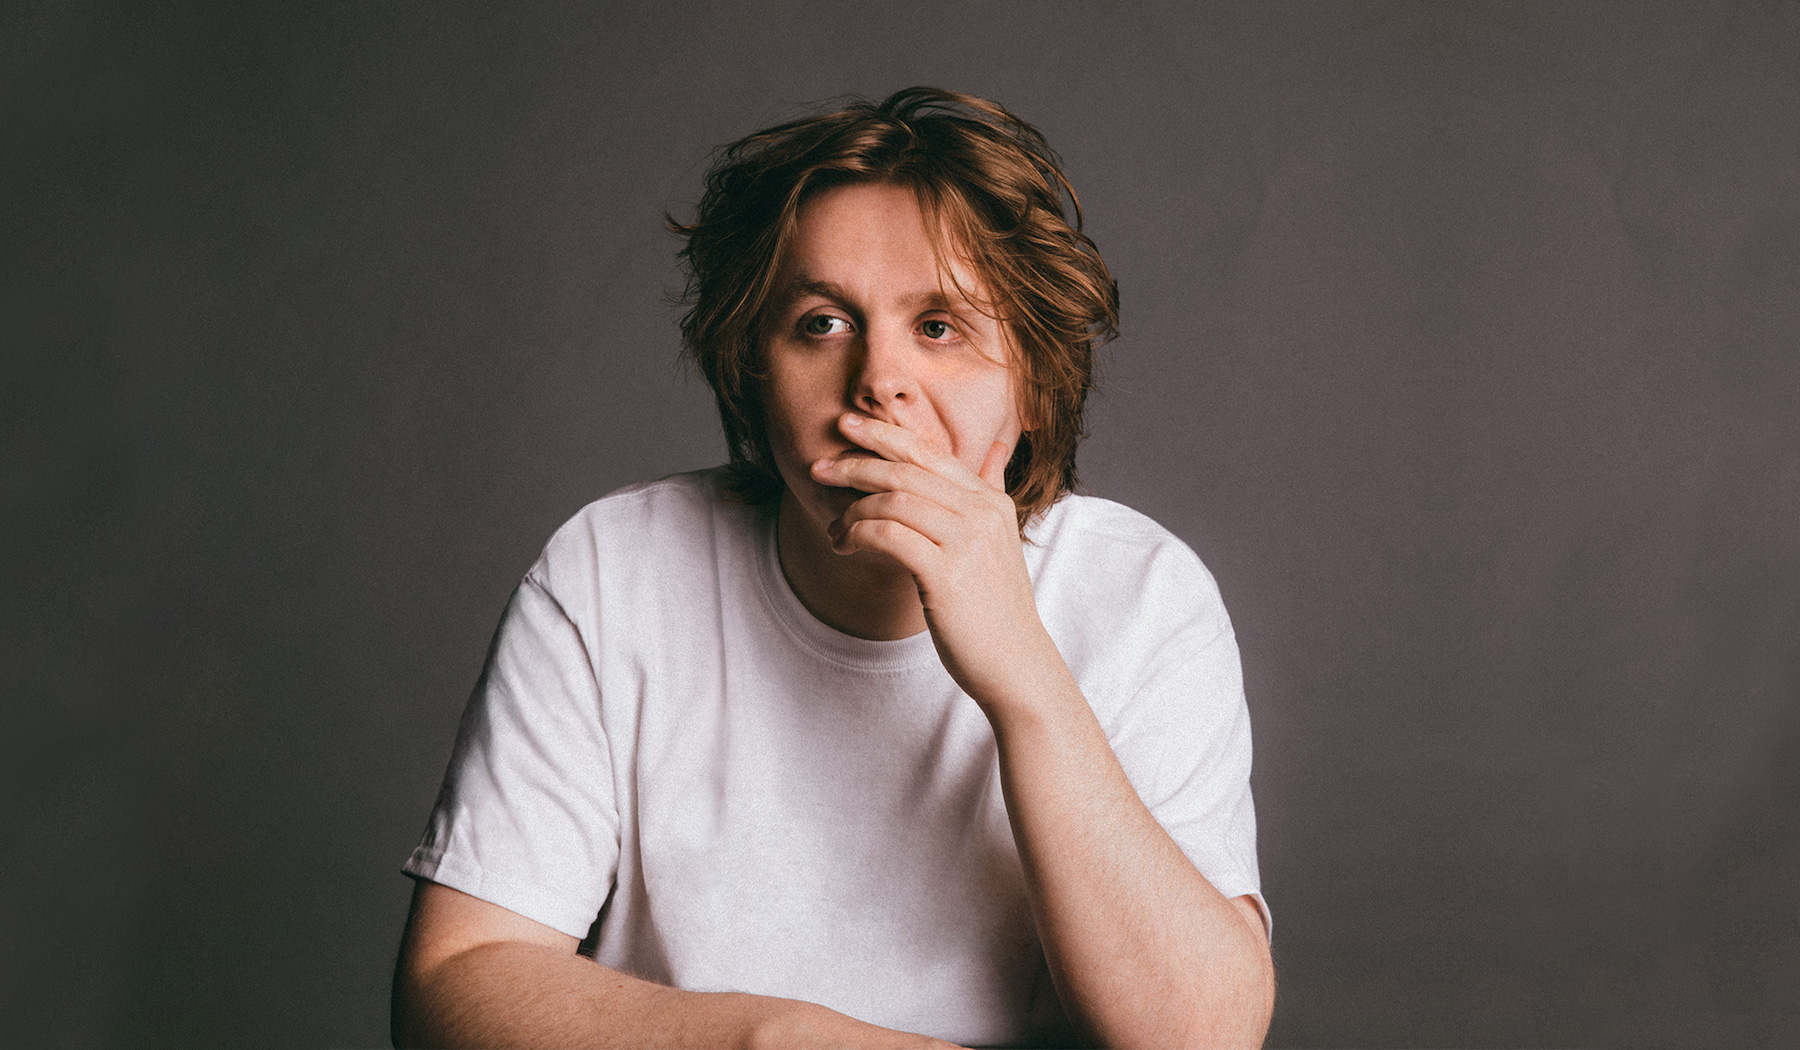 Australia one of the biggest markets for Lewis Capaldi on Apple Music